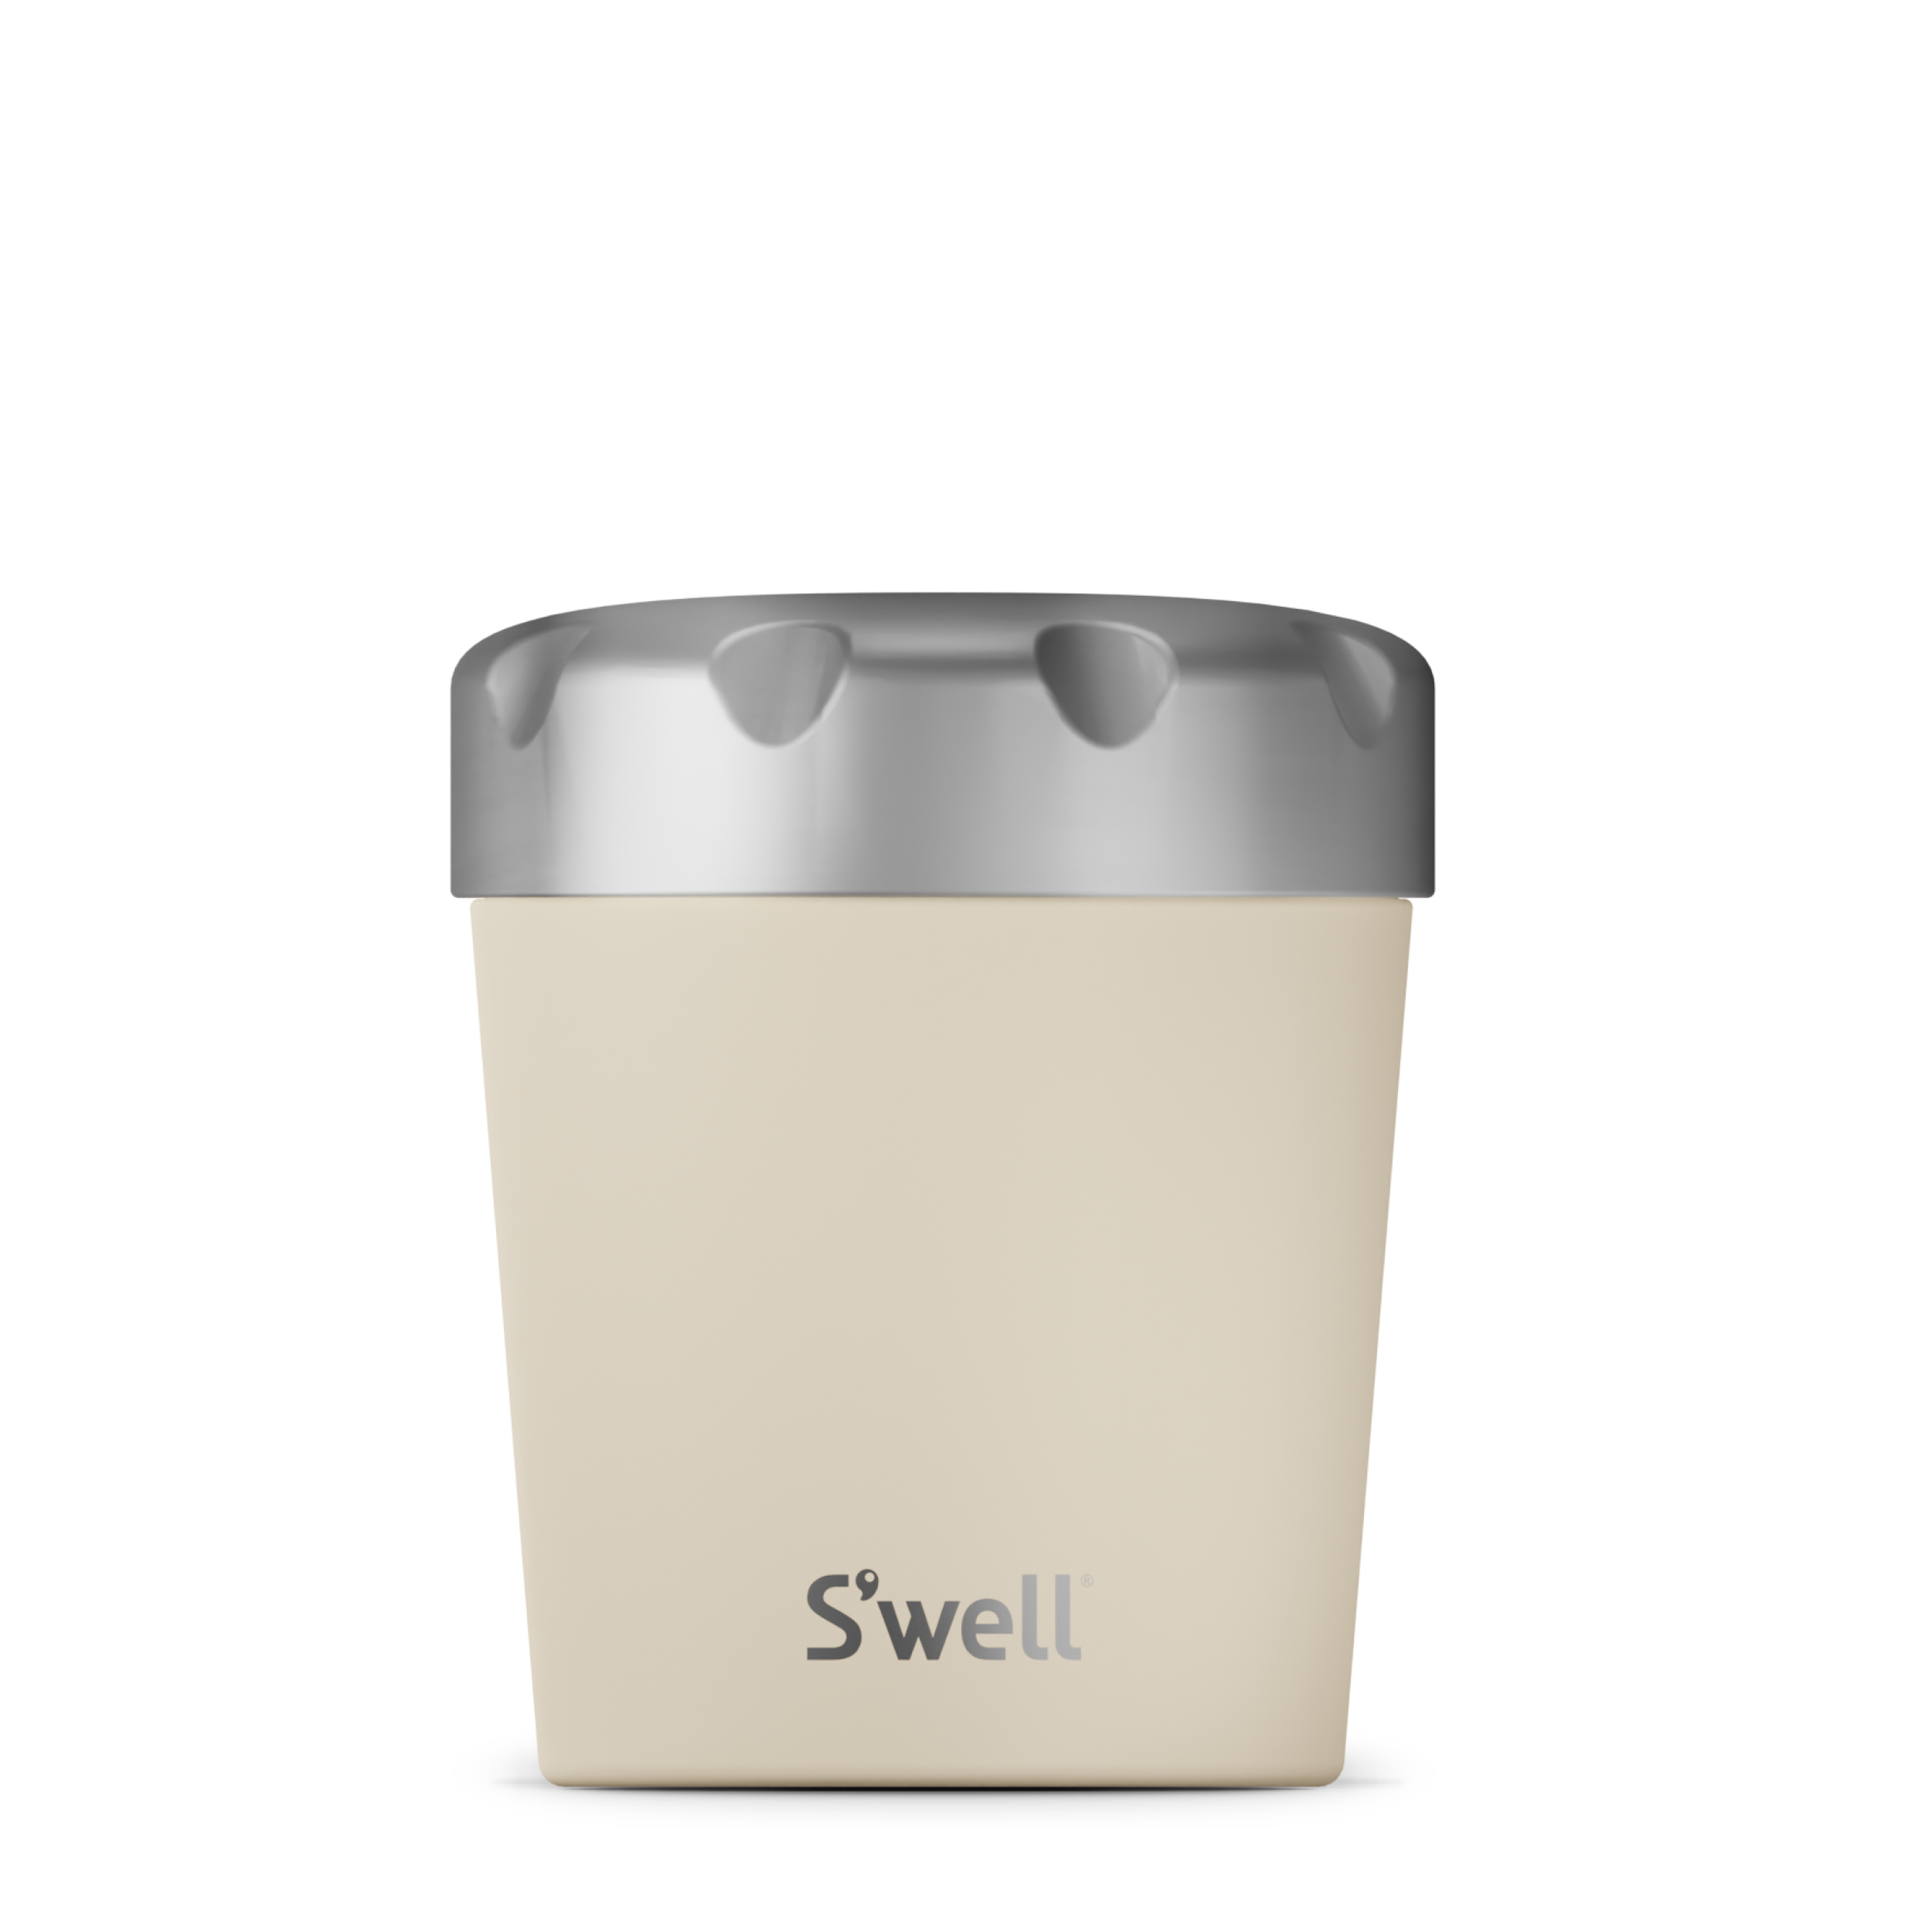 S'well Stainless Steel Salad Bowl Kit - 64oz, Onyx - Comes with 2oz  Condiment Container and Removable Tray for Organization - Leak-Proof, Easy  to